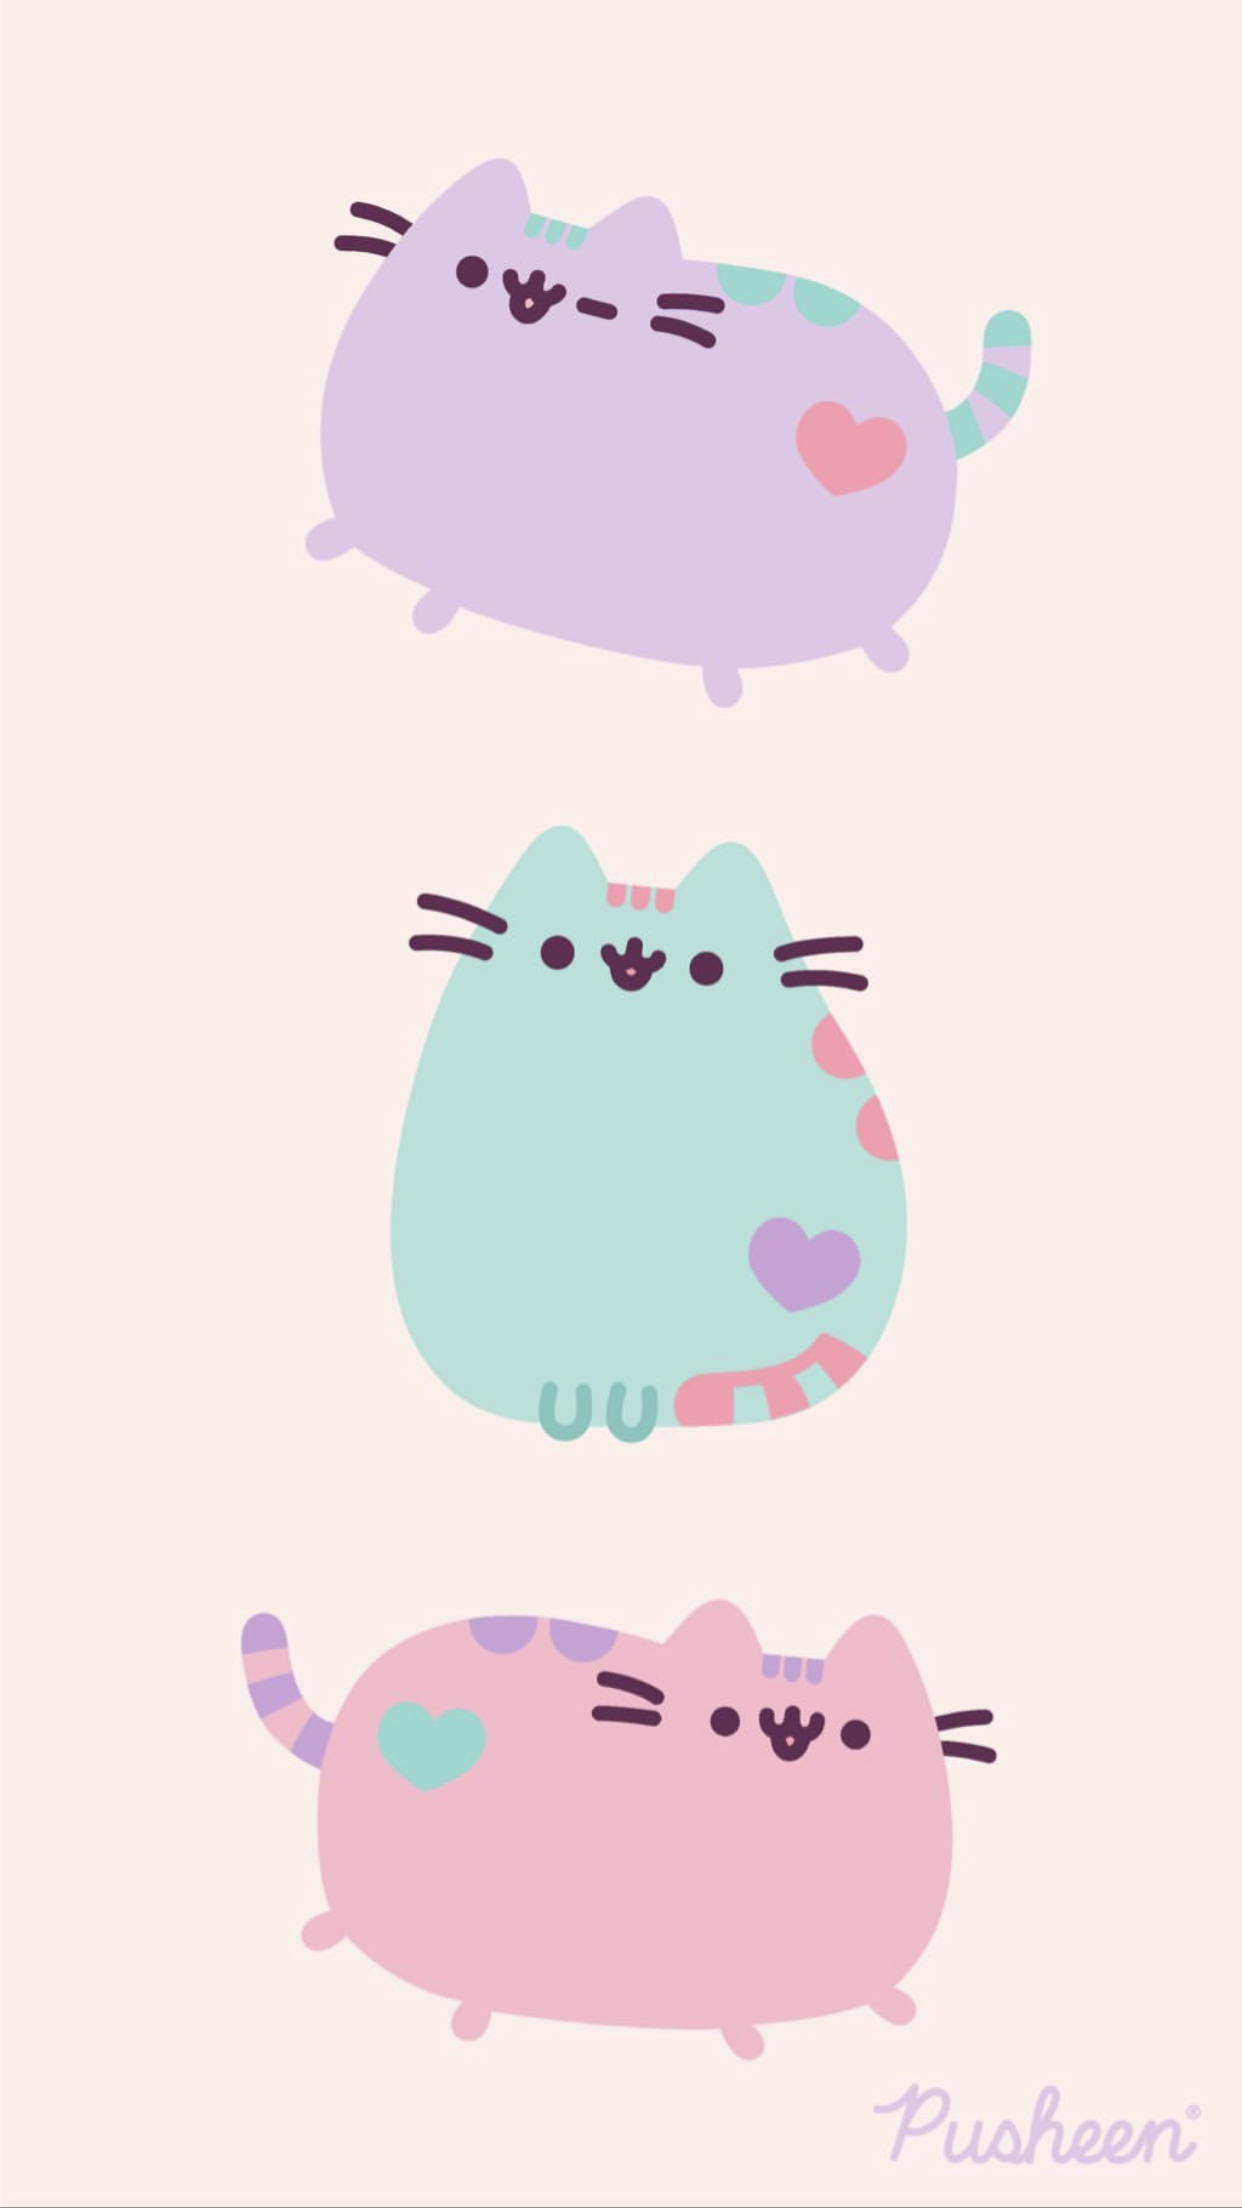 Pusheen the cat floral pastels spring iphone wallpaper. Pusheen cute, Pusheen cat, Cute cartoon wallpaper